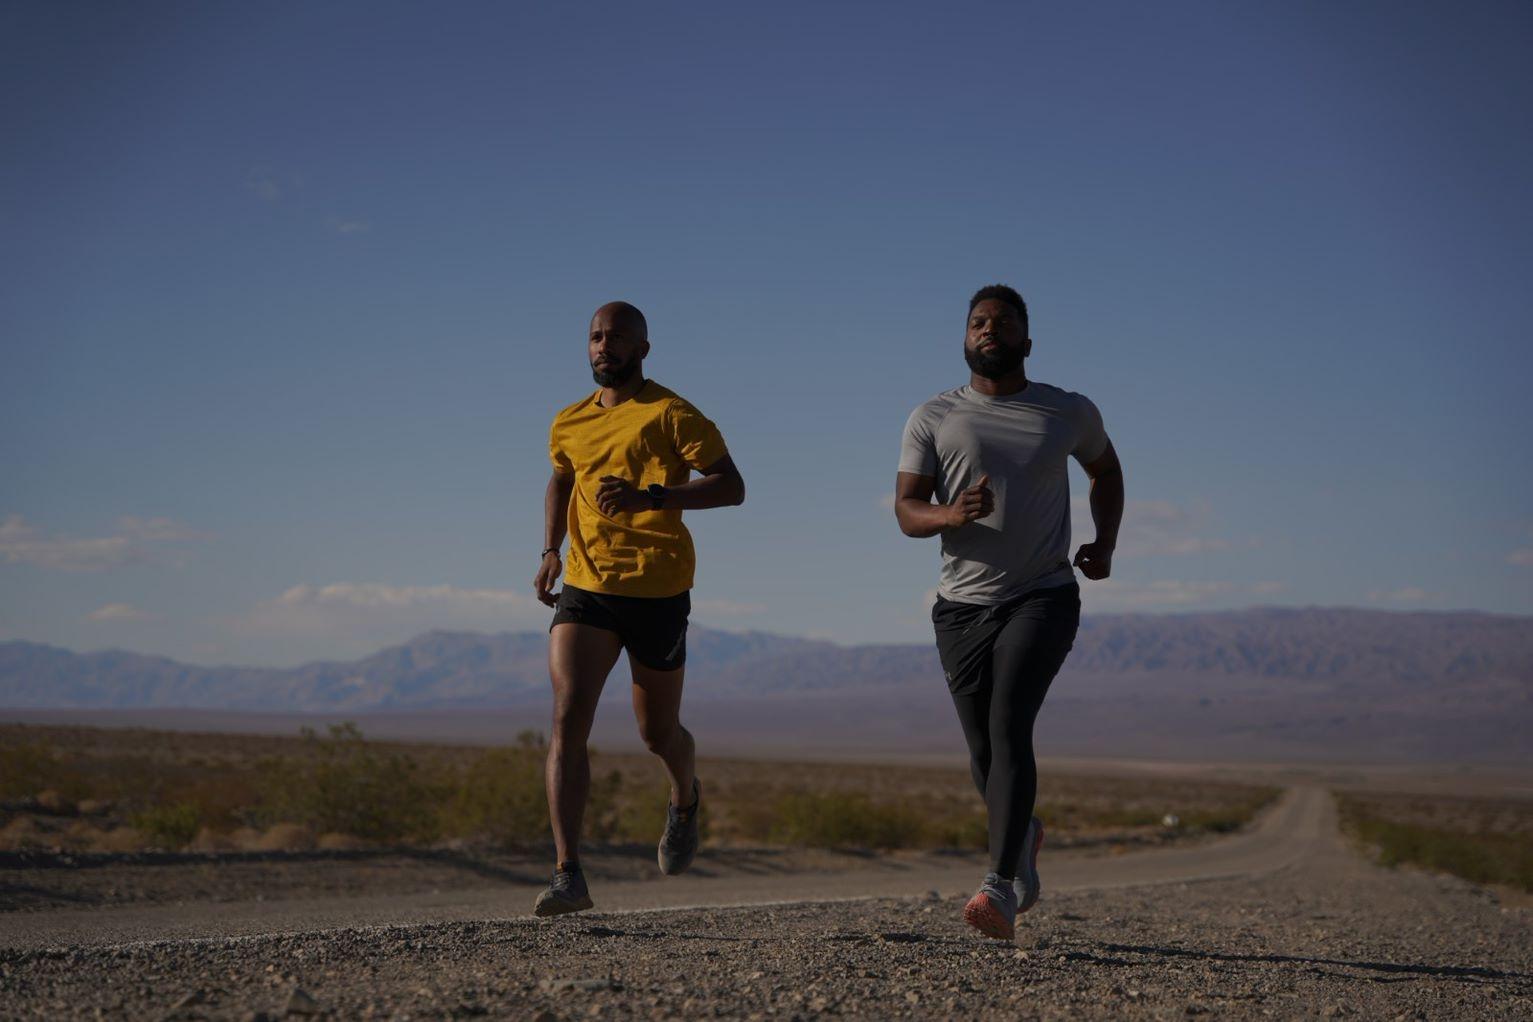 Mosi Smith and Baratunde Thurston jogging in Death Valley National Park, CA